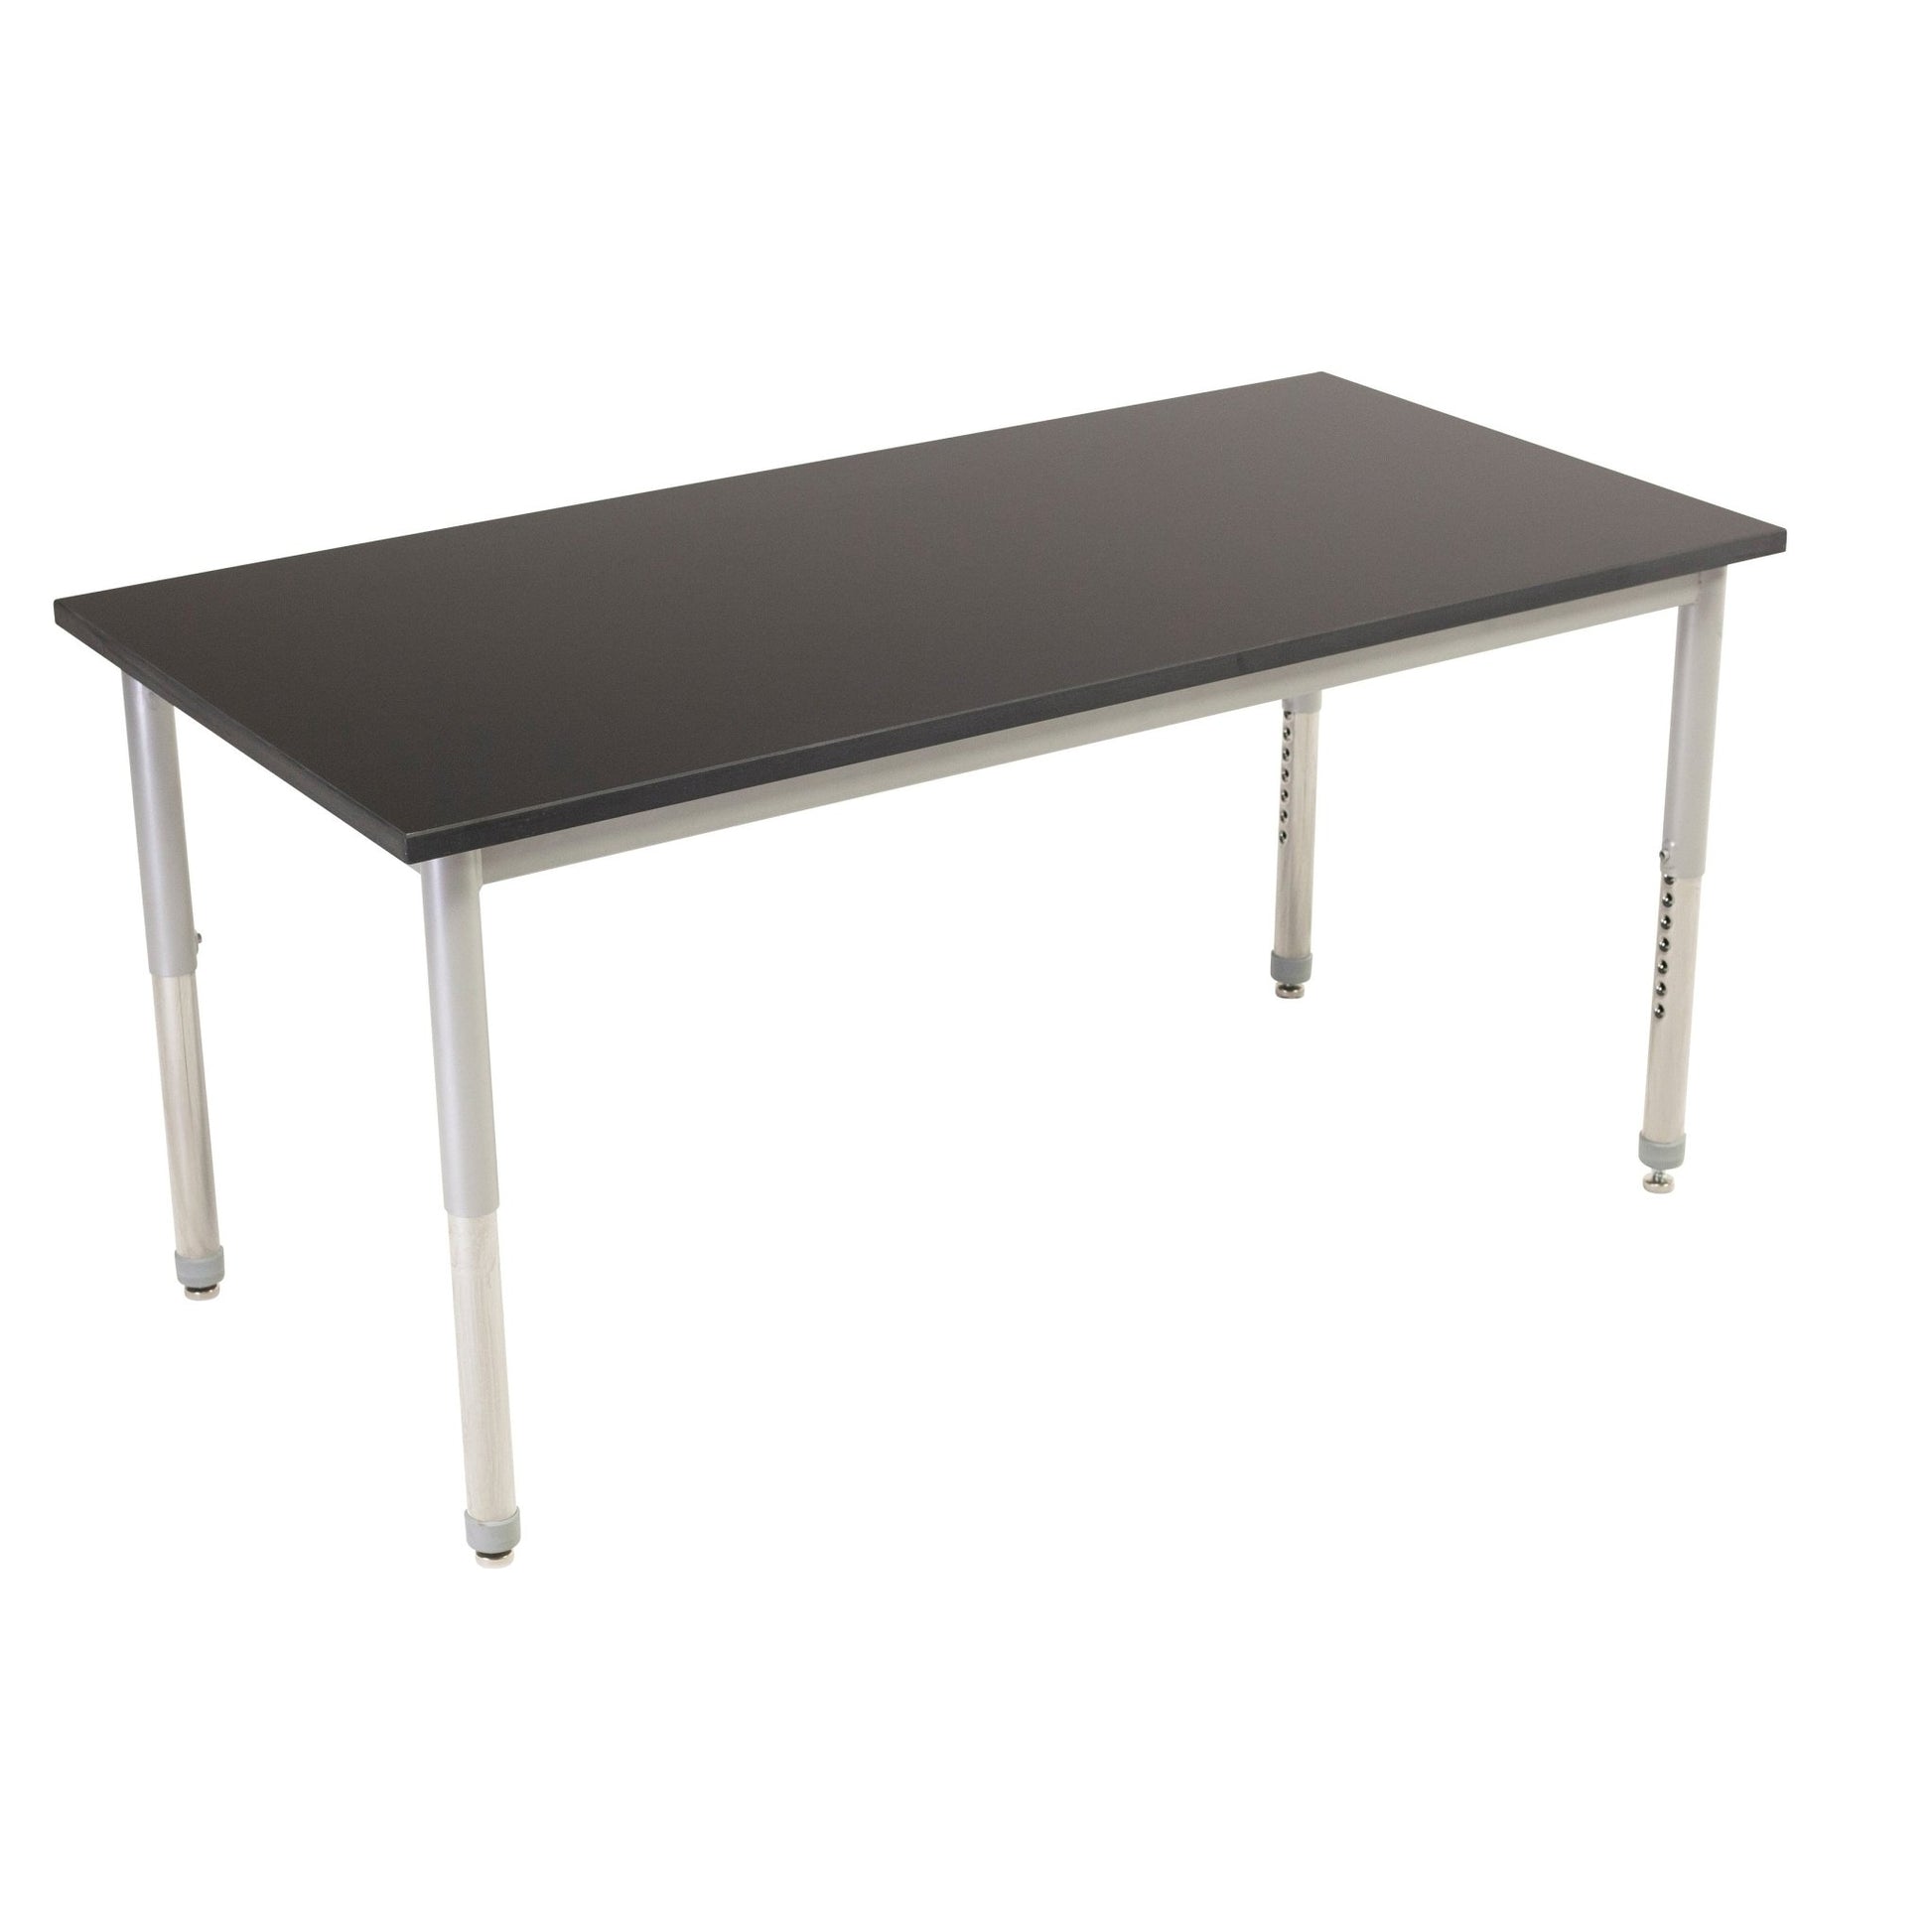 AmTab Science Lab Table - 36"W x 48"L x Adjustable Height 30" to 38" - Phenolic Resin Chem Res Top (AMT-SCI364PR) - SchoolOutlet